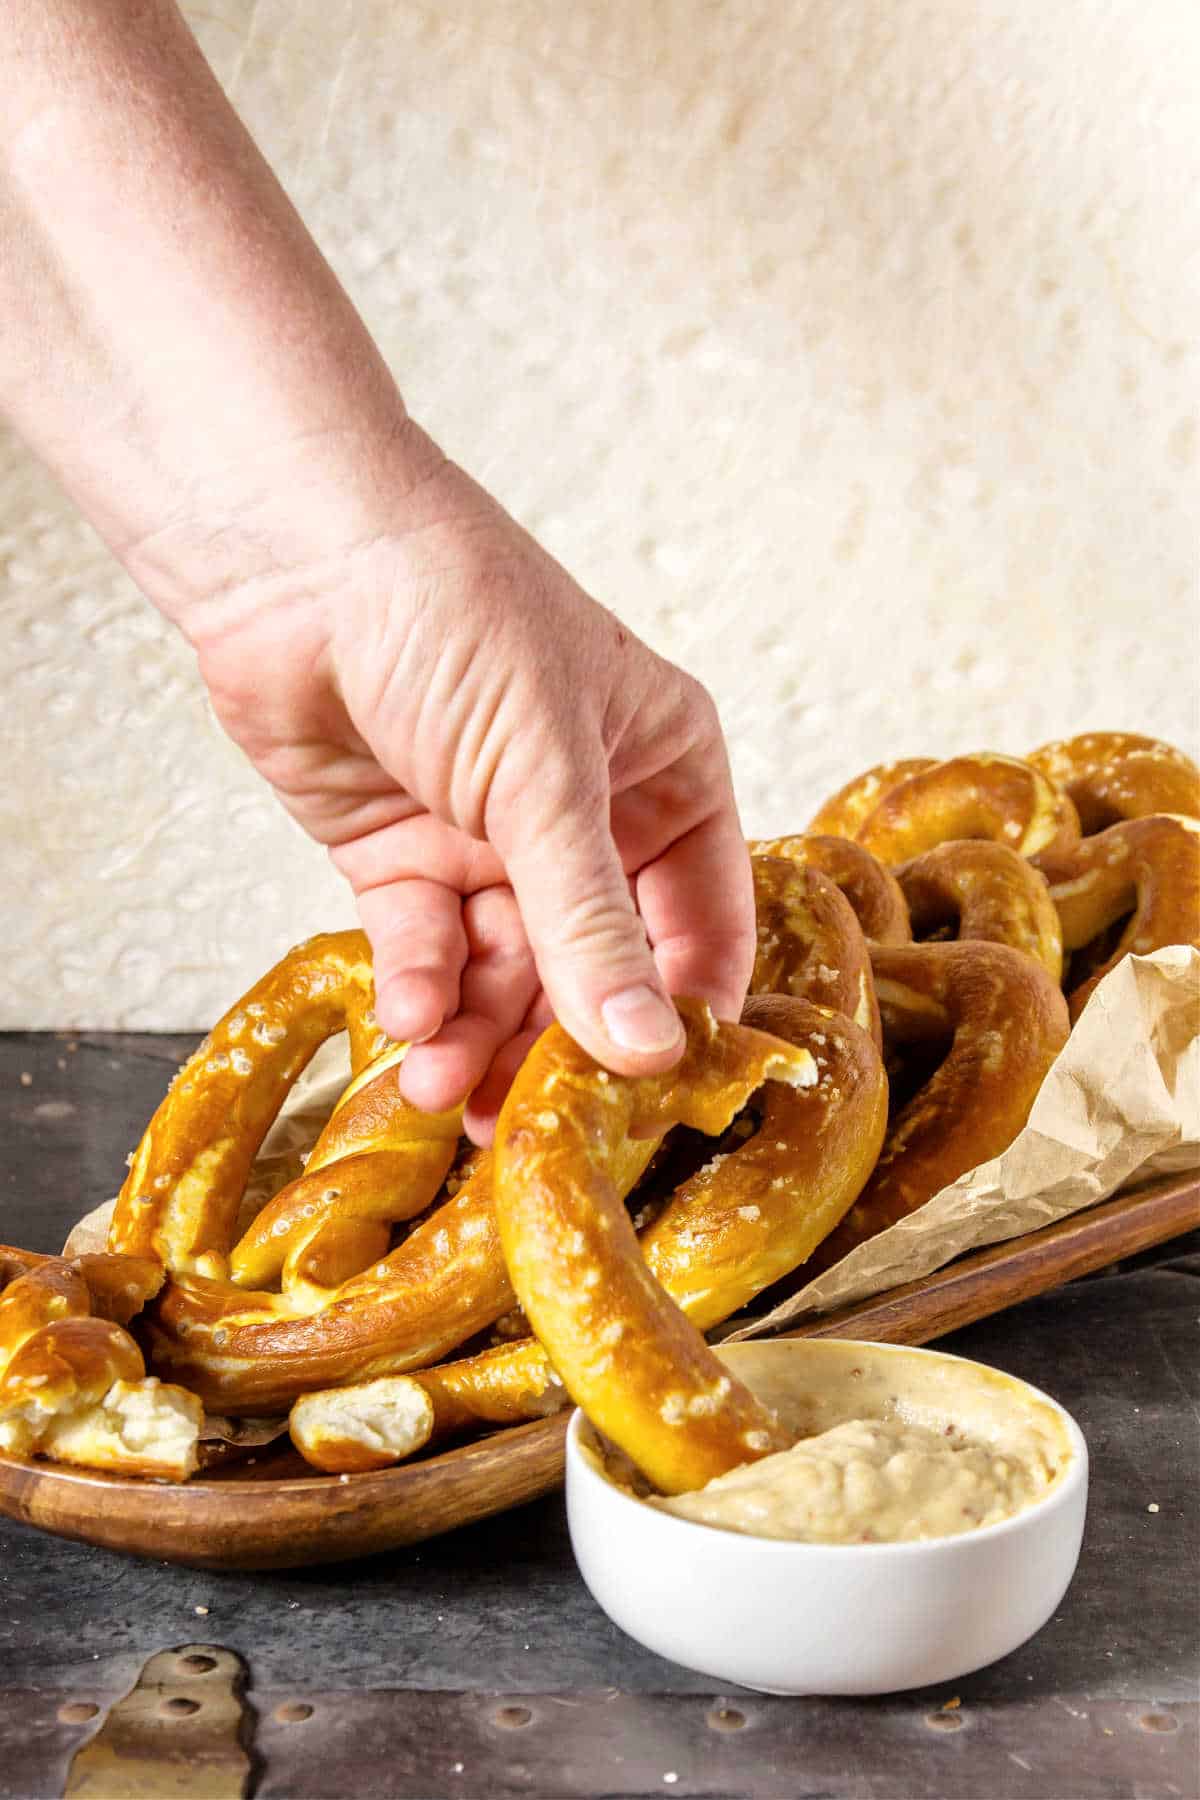 A hand holding a bread pretzel and dipping it into a small white bowl of beer cheese.